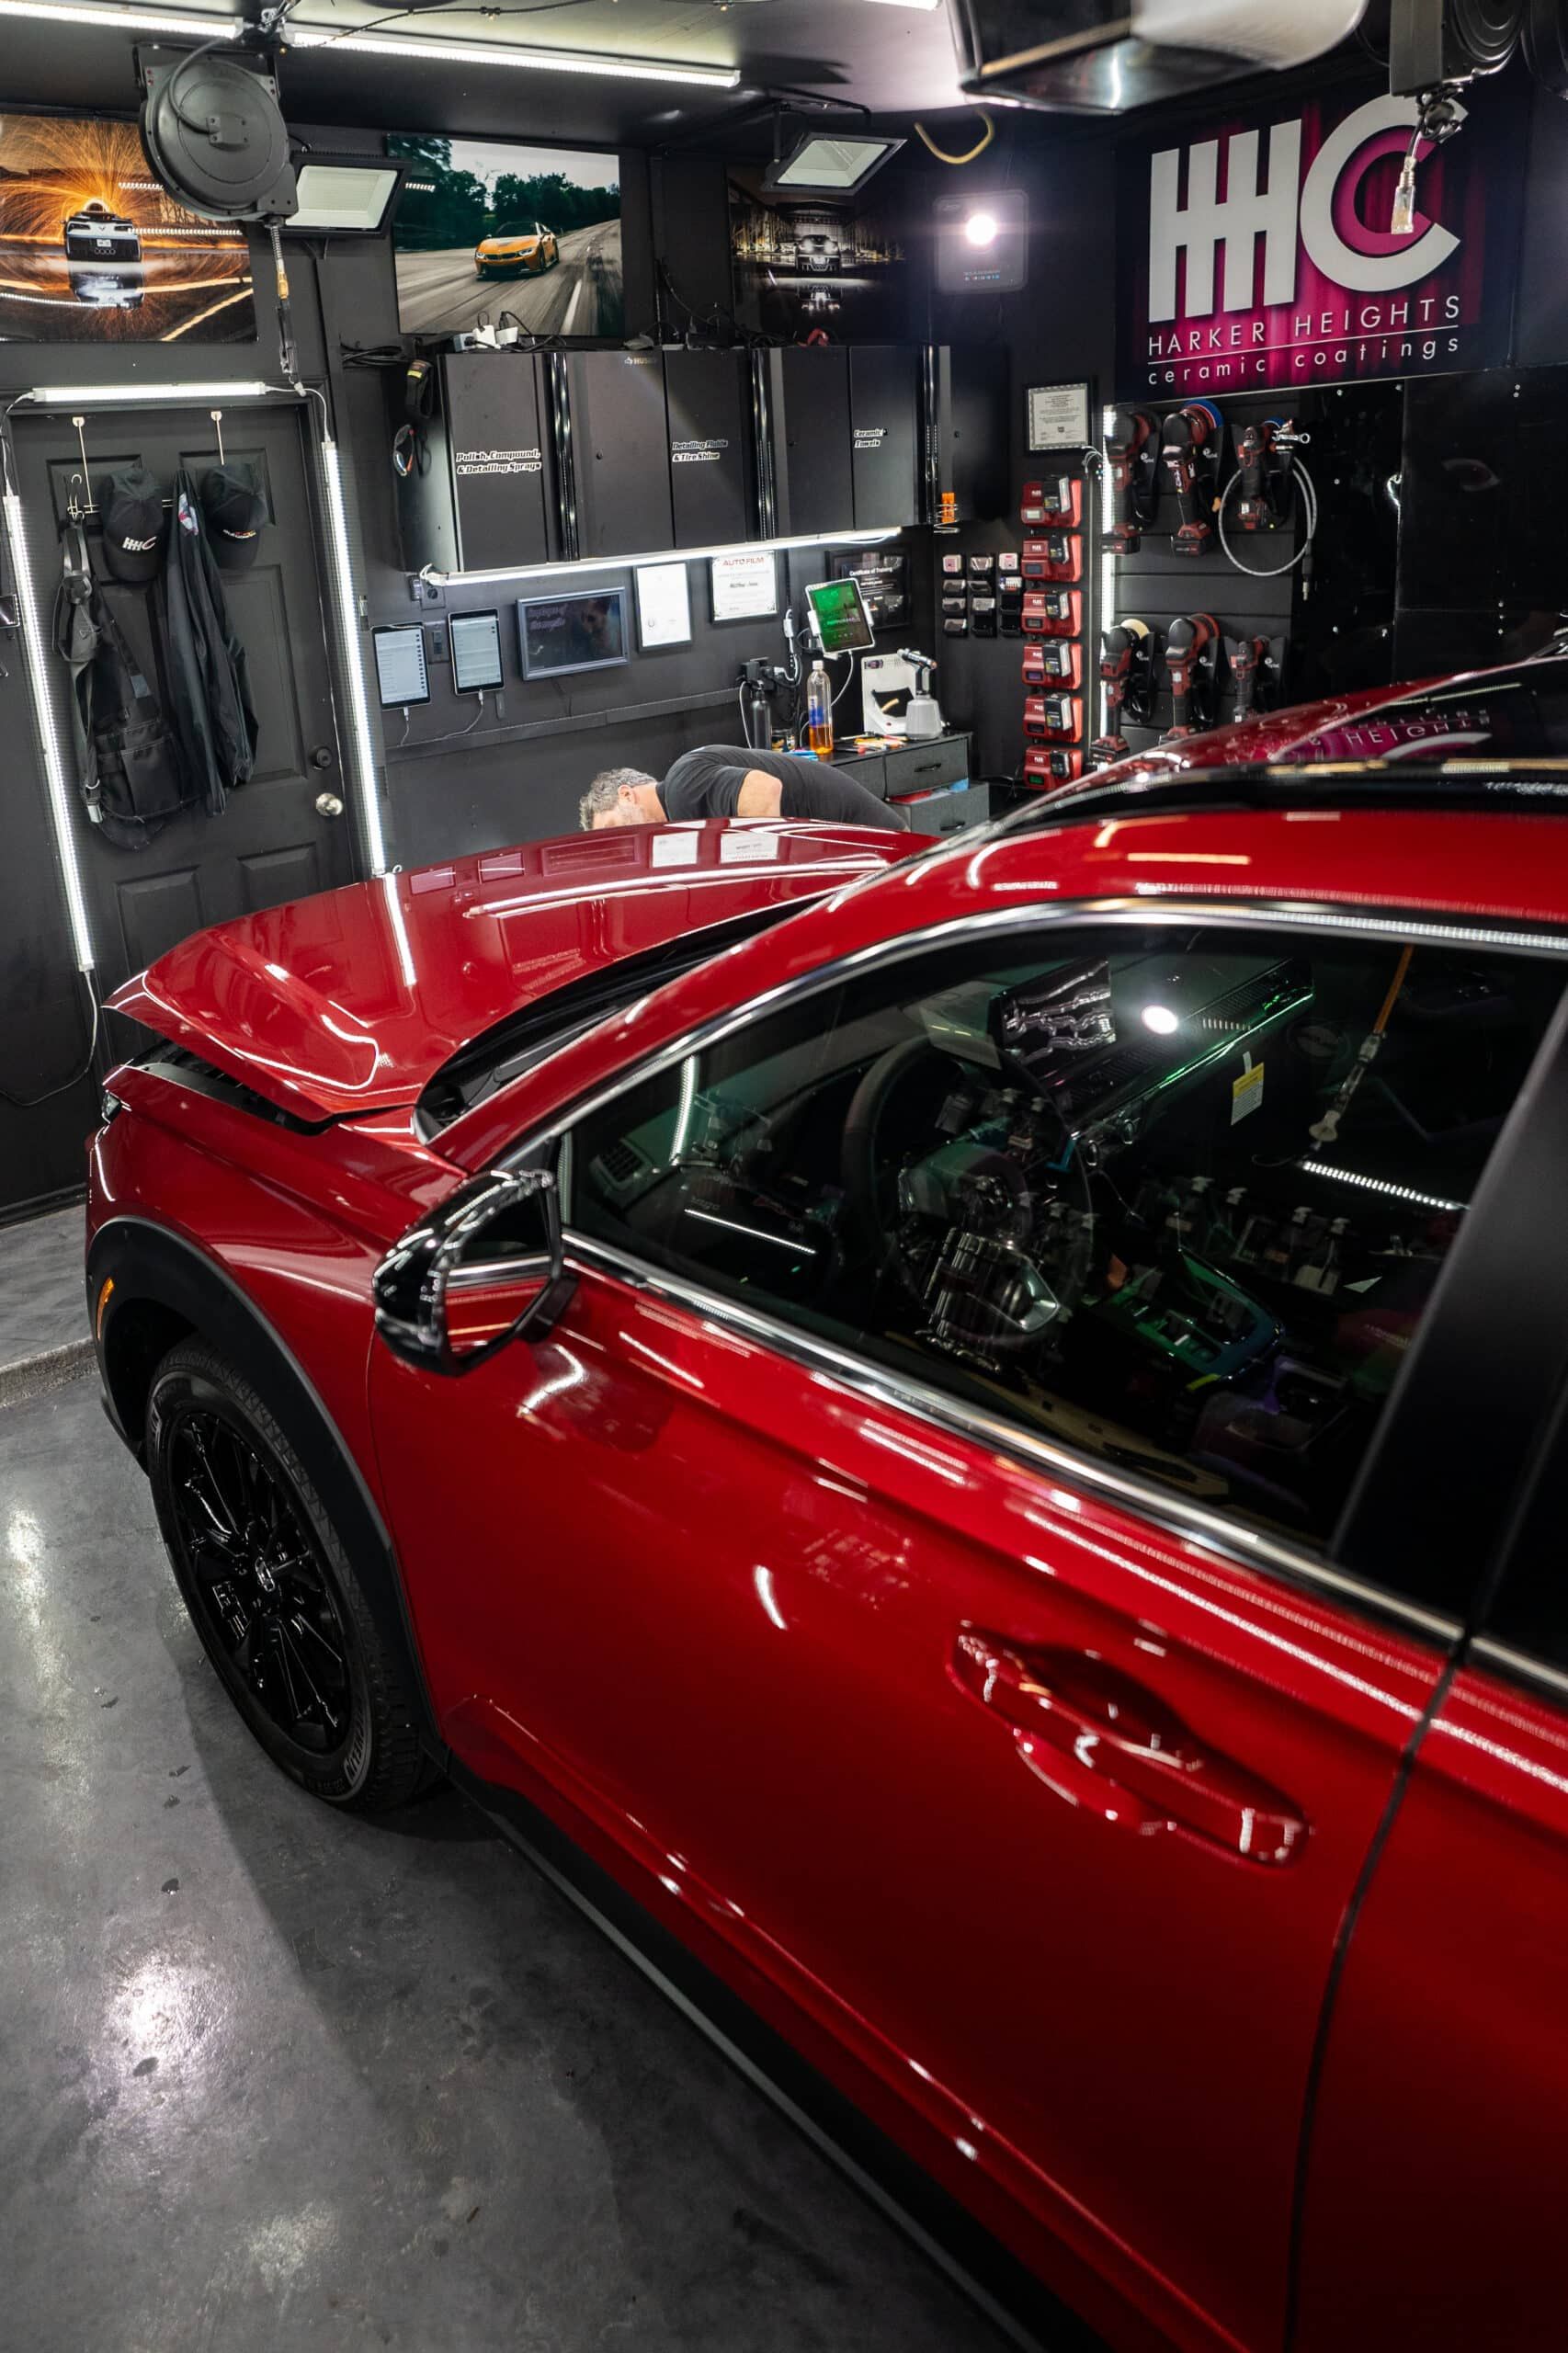 A red car is parked in a garage.